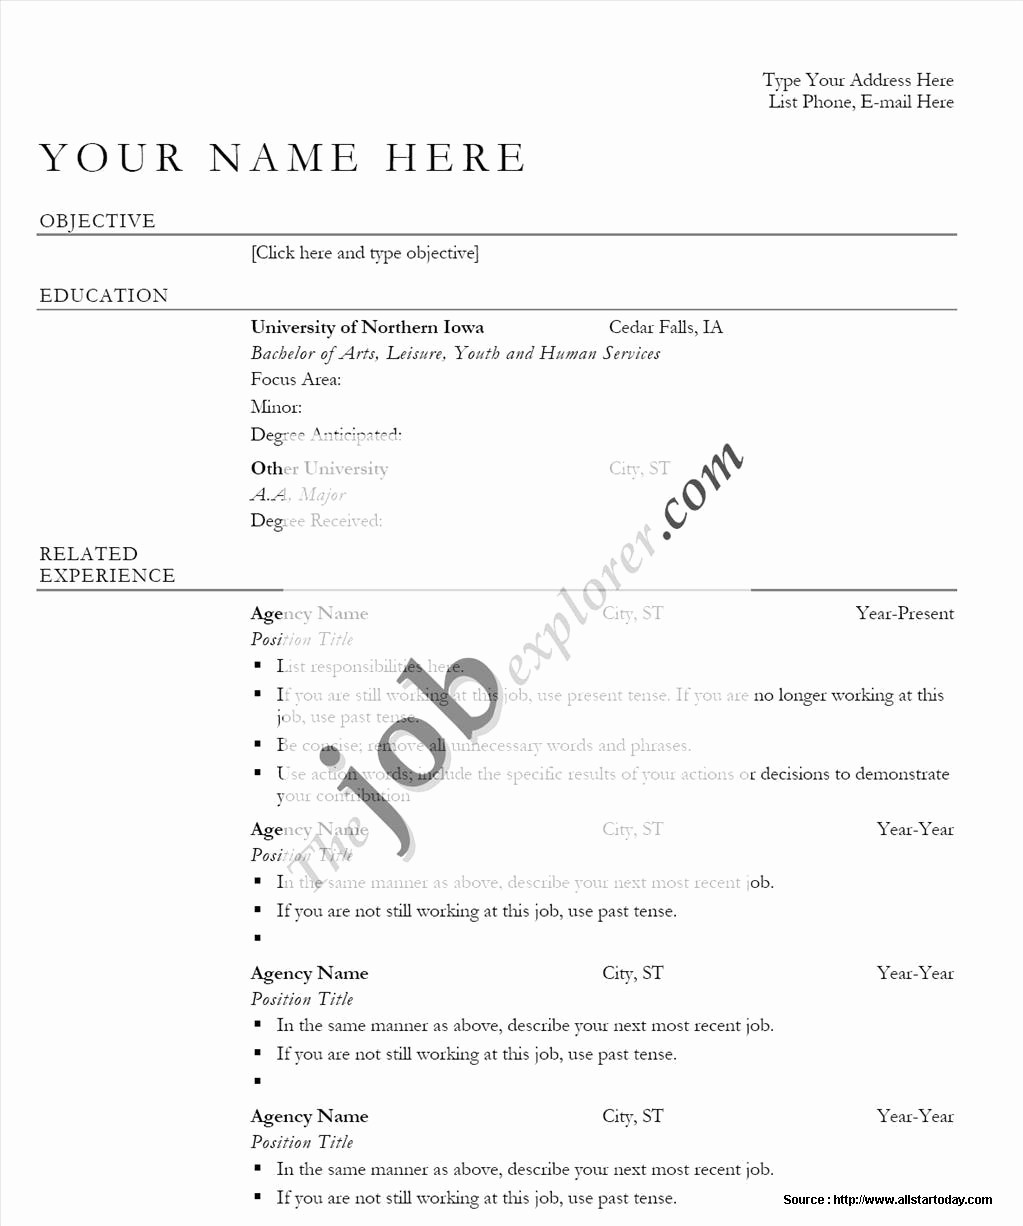 Resumes Fill In the Blanks Unique Fill In the Blank Functional Resume Template Resume